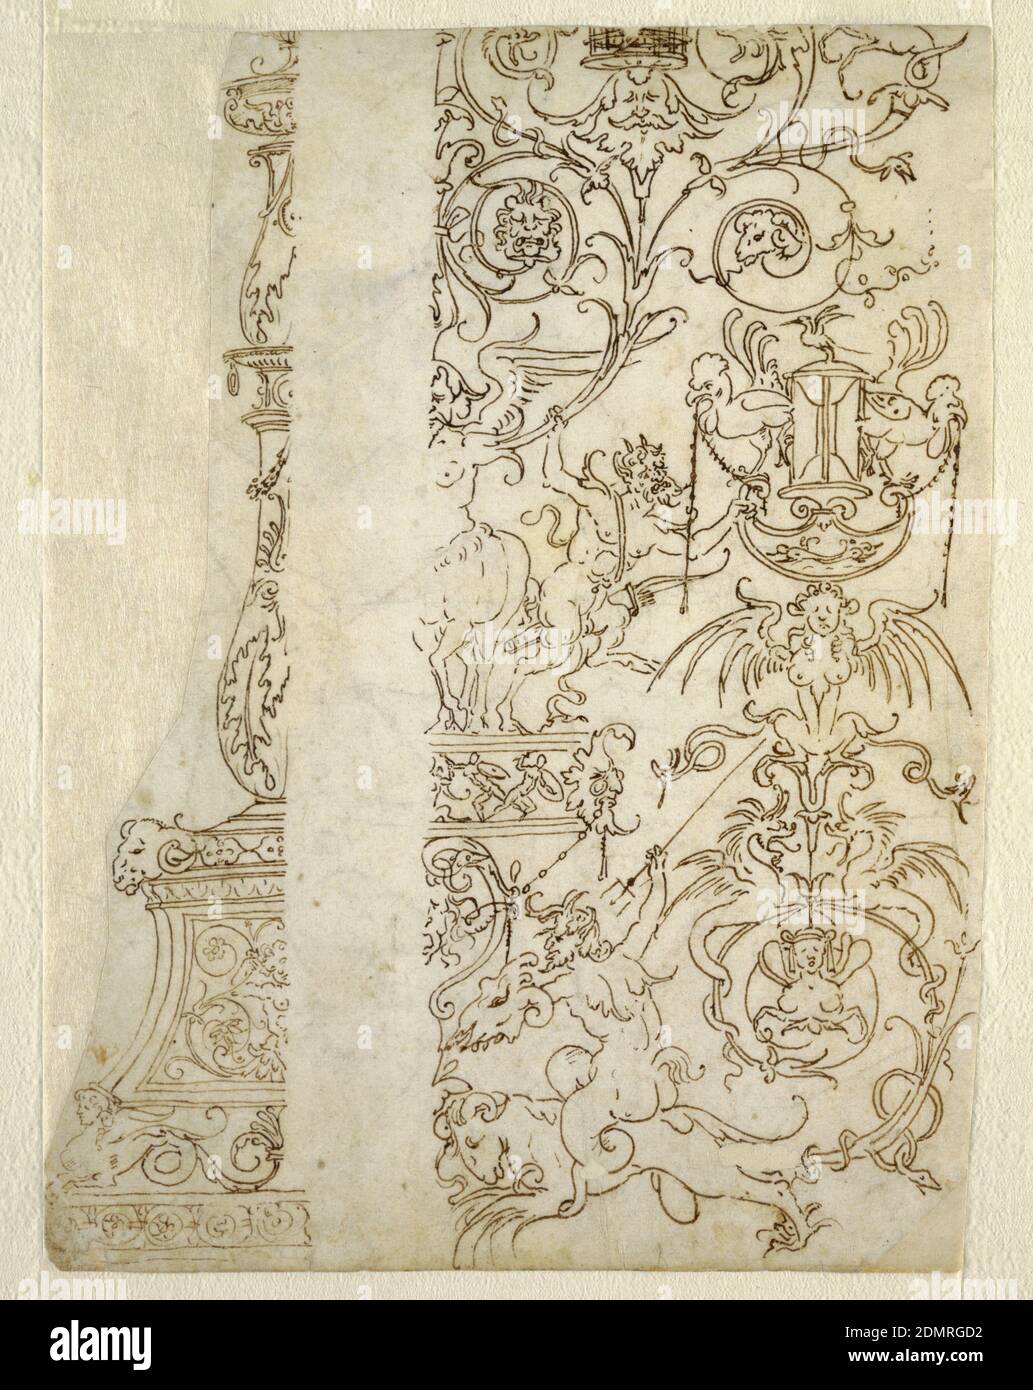 Design for Candelabrum and Panel of Grotesques, Pen and brown ink on paper, lined, At left, a double baluster candelabrum in profile with ram's head and sphinx on pedestal. At right, a grotesque design shows sphinxes, harpies, roosters and satyrs with hourglass entwined with vine tendrils., Italy, early 16th century, ornament, Drawing Stock Photo